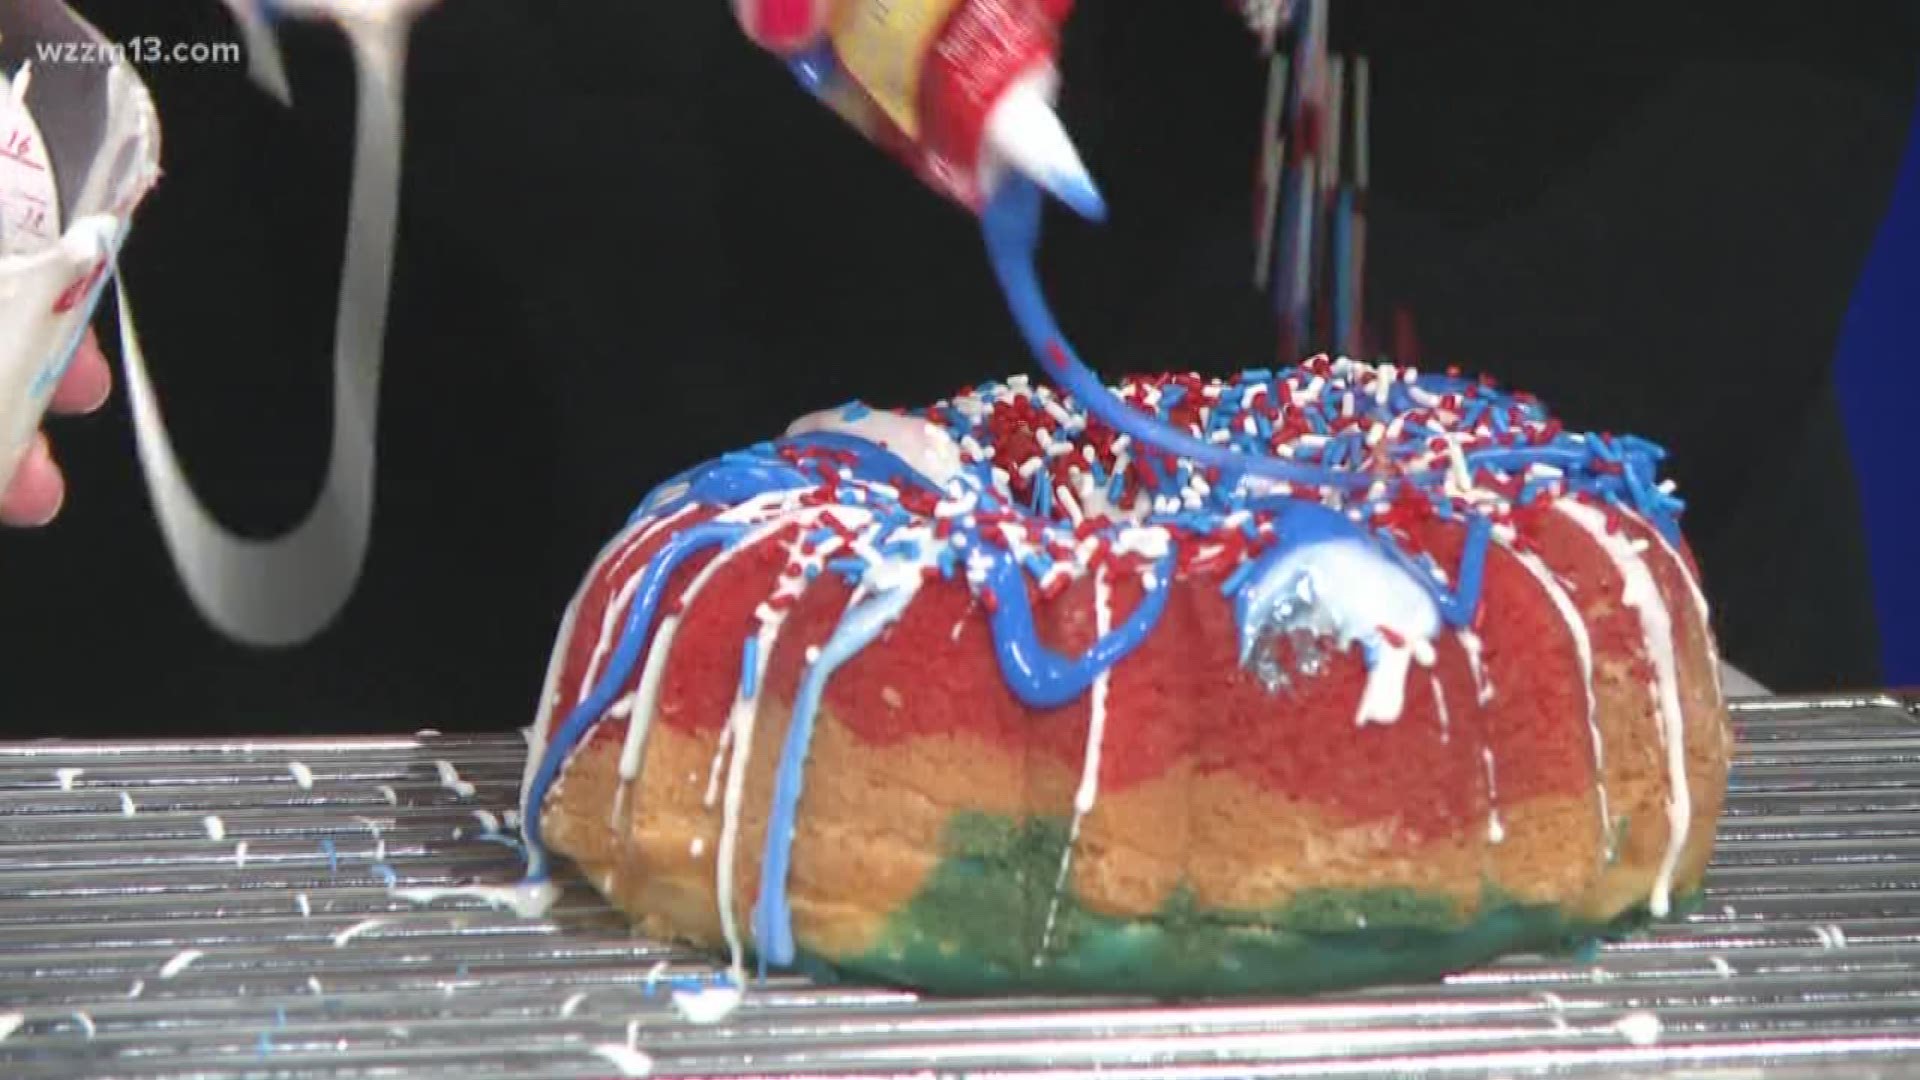 We're celebrating Memorial Day weekend with a variety of patriotic red, white and blue recipes. If you have sweet tooth, check out this white cake turned total firecracker by Arlene Cumming.